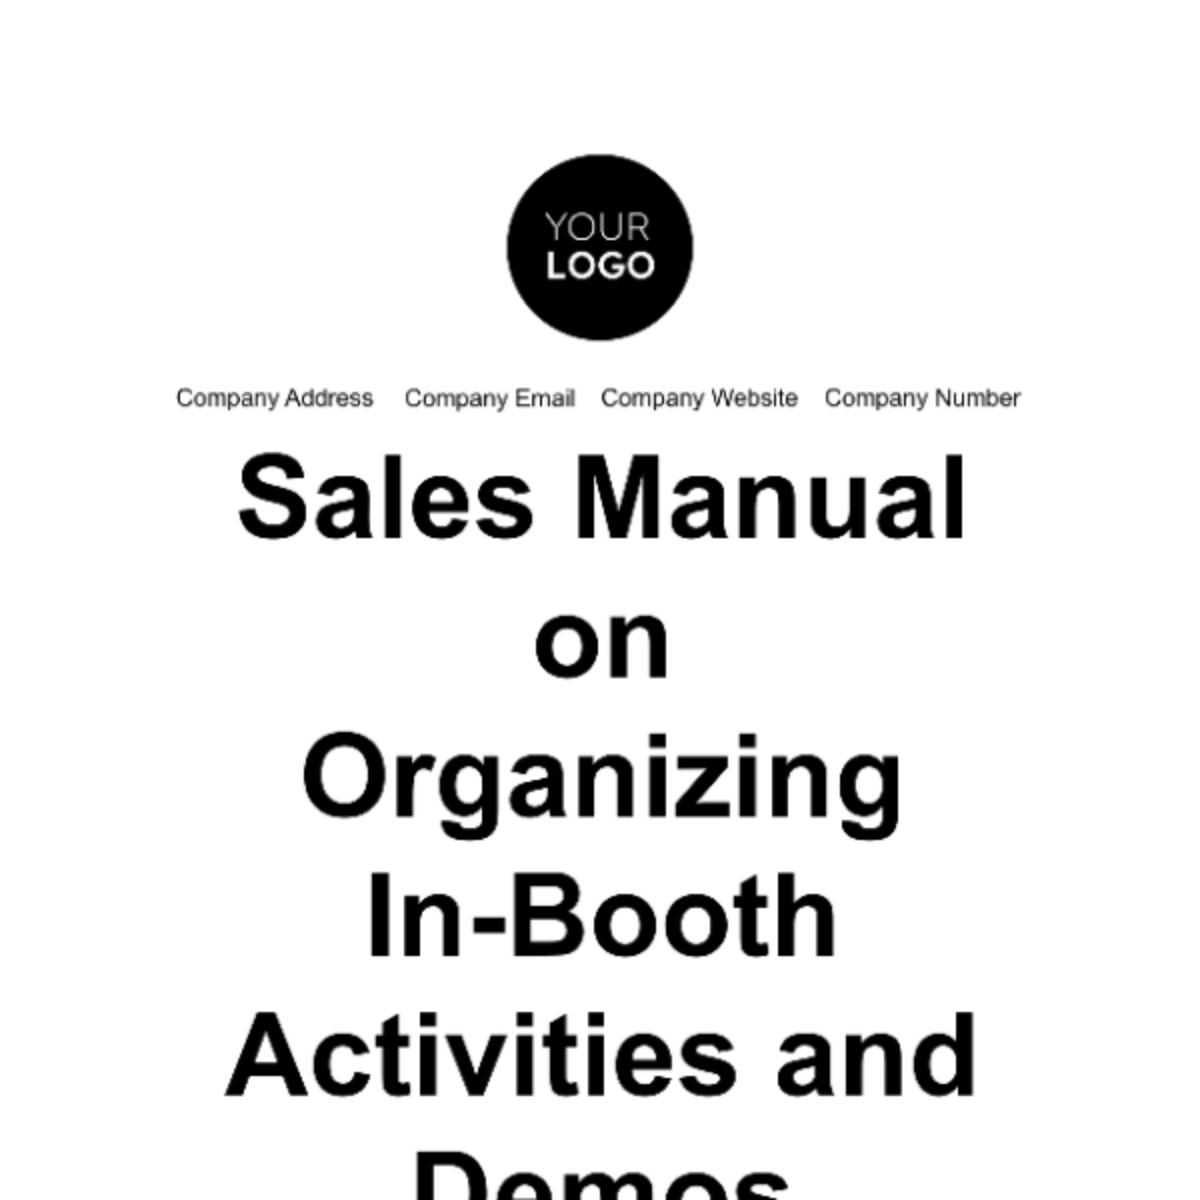 Sales Manual on Organizing In-Booth Activities and Demos Template